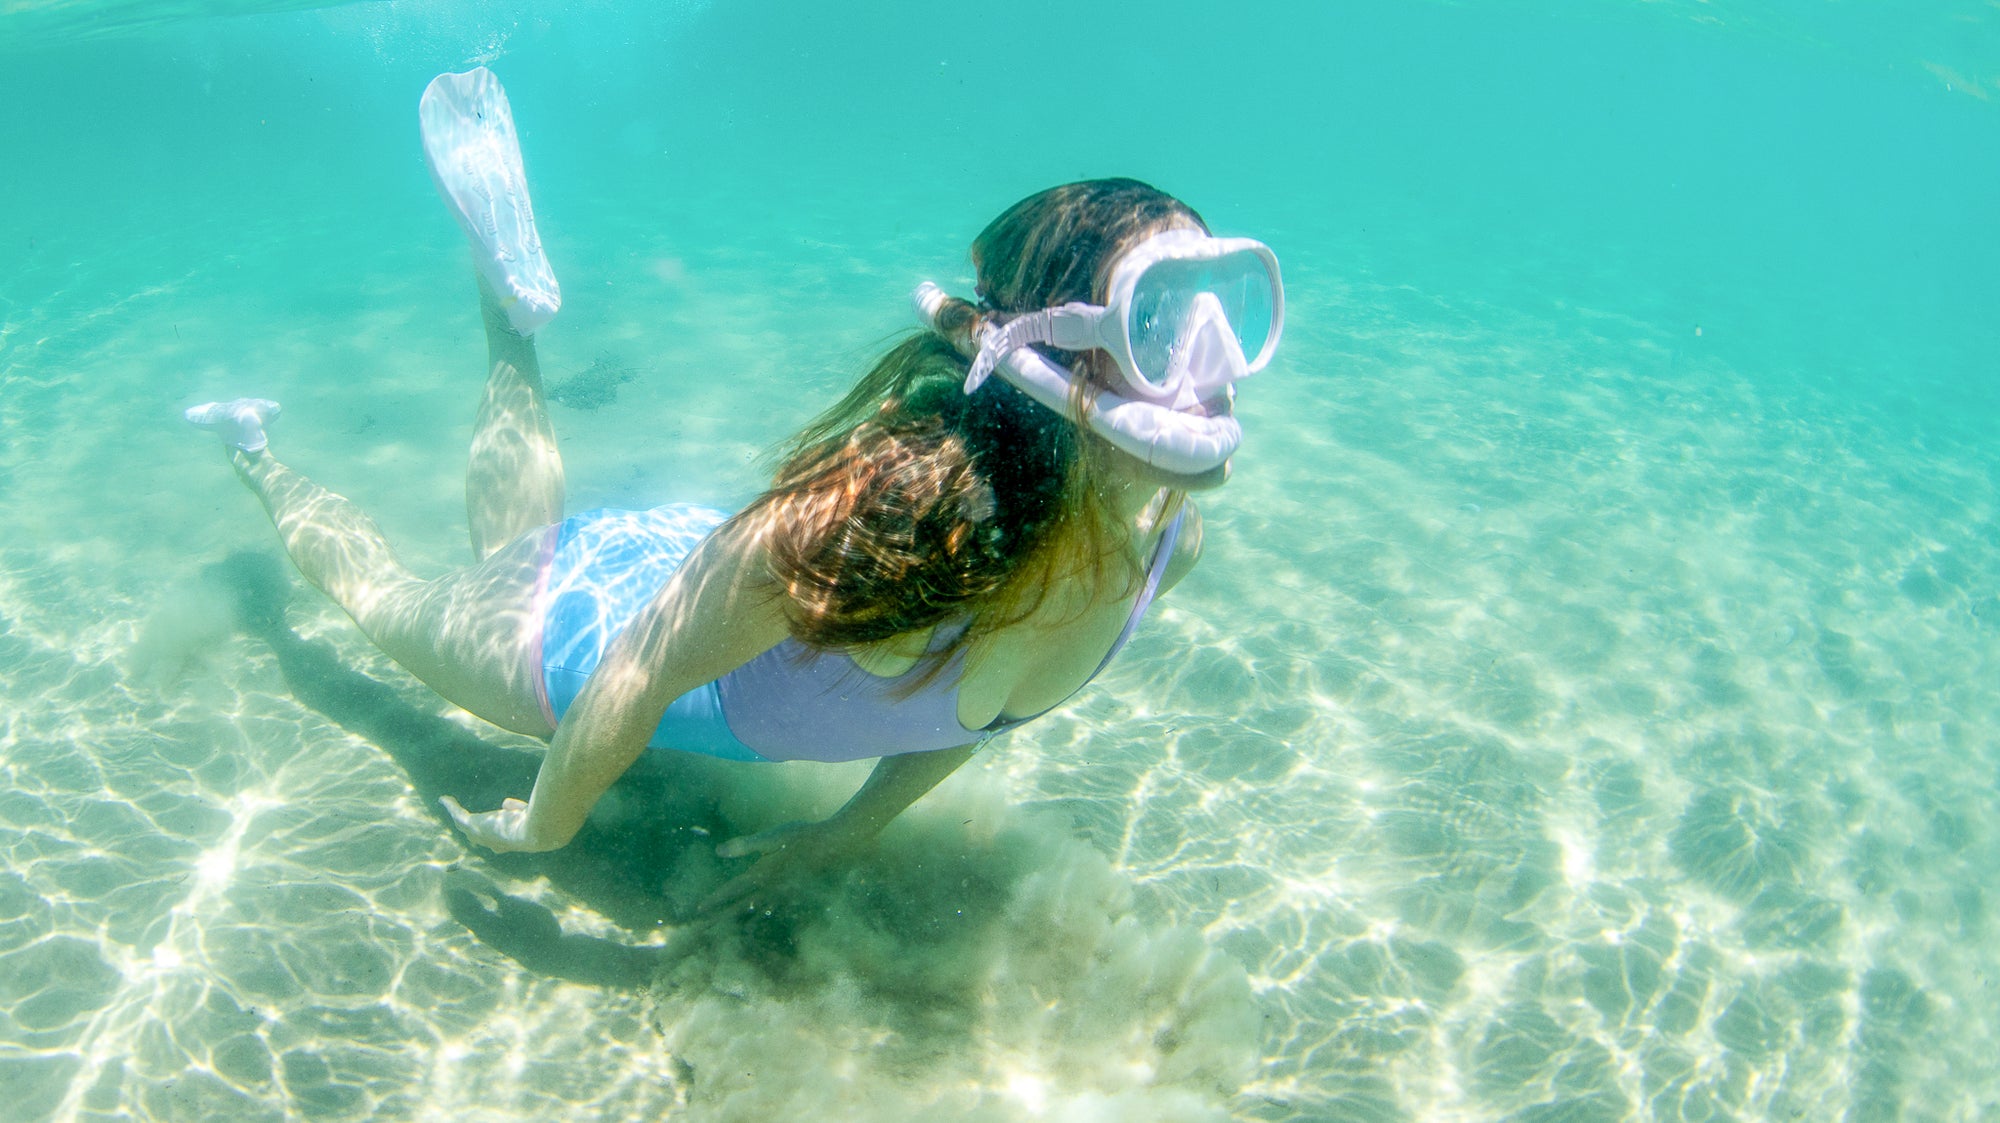 Dive into the ocean with style and comfort using our stylish Snorkel Sets, Matching Fins & Neoprene Mask Strap Covers. Available in mint green, lilac purple, pastel pink & white.